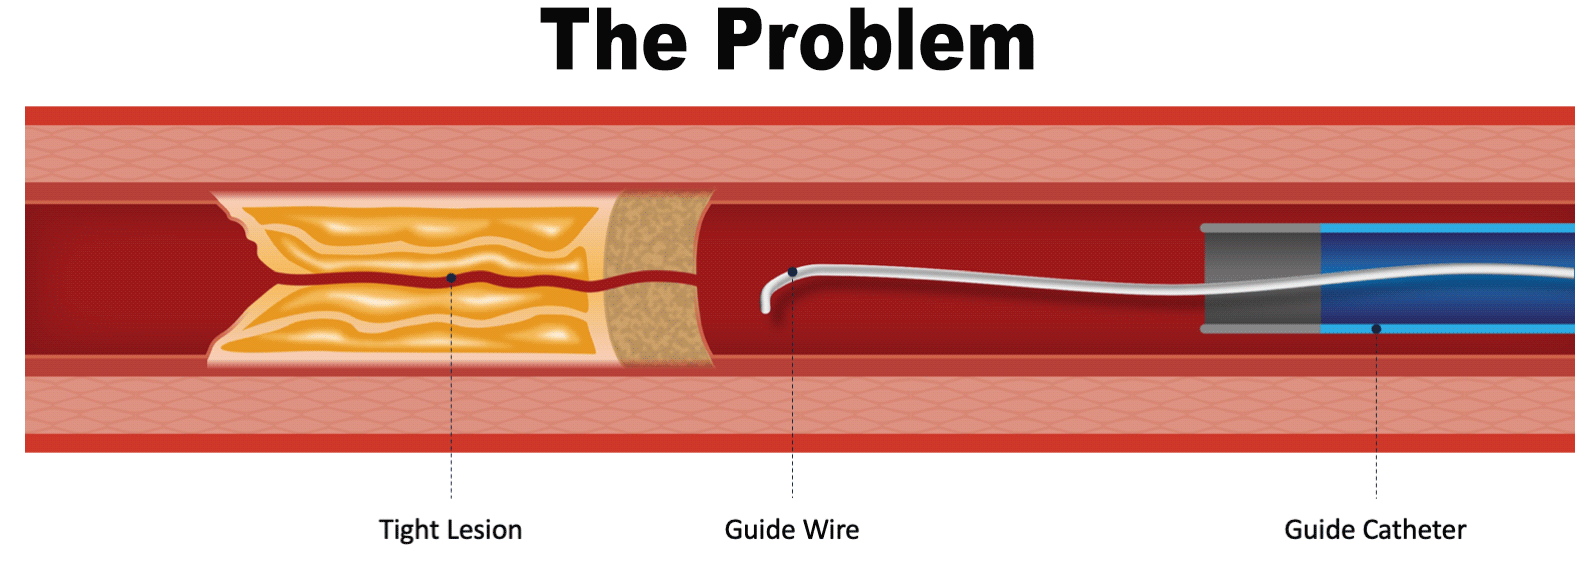 gif animation of guidewire moving through lesion and blocked by a tight and calcified lesion. The guidewire bends as it tries to push through